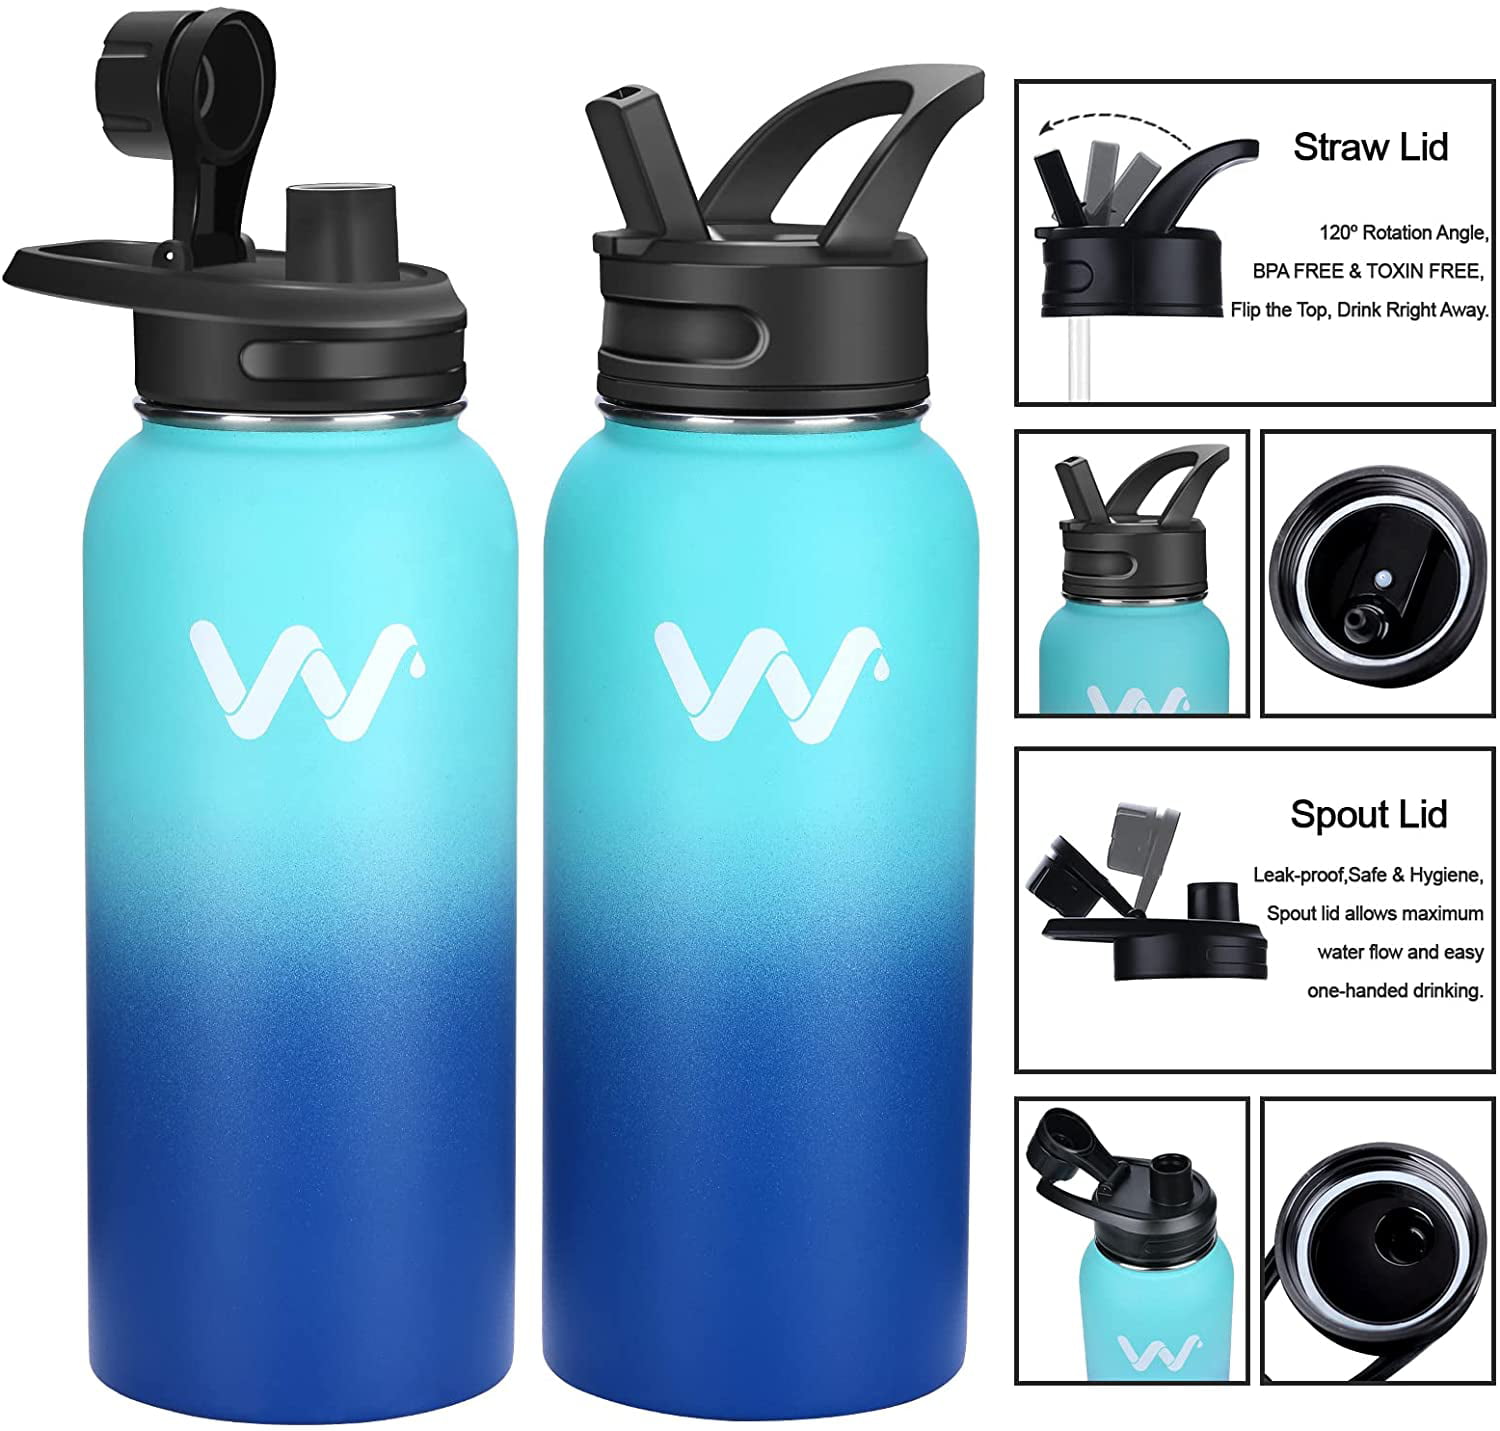 ALBOR Insulated Water Bottle with Straw - 32 oz Water Bottles - Triple Insulated Stainless Steel Water Bottles with 4 Leak-Proof